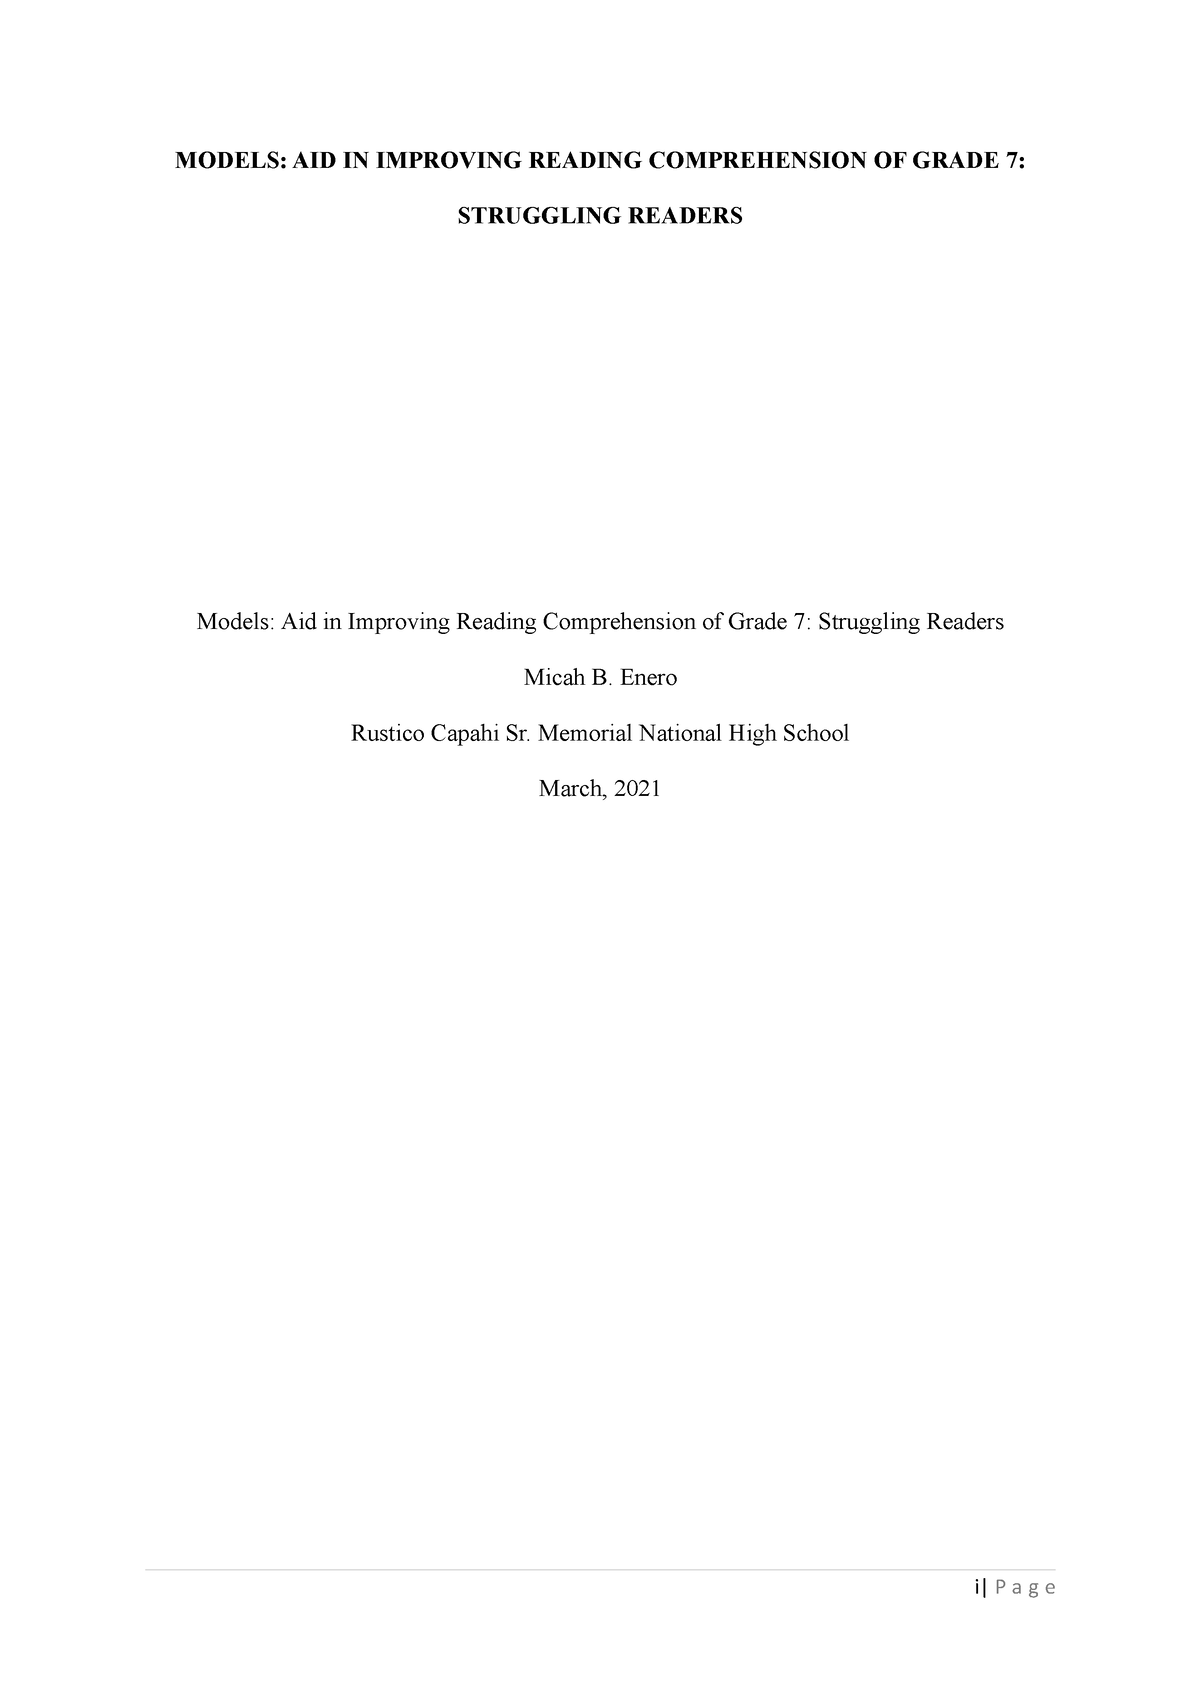 thesis title about reading comprehension